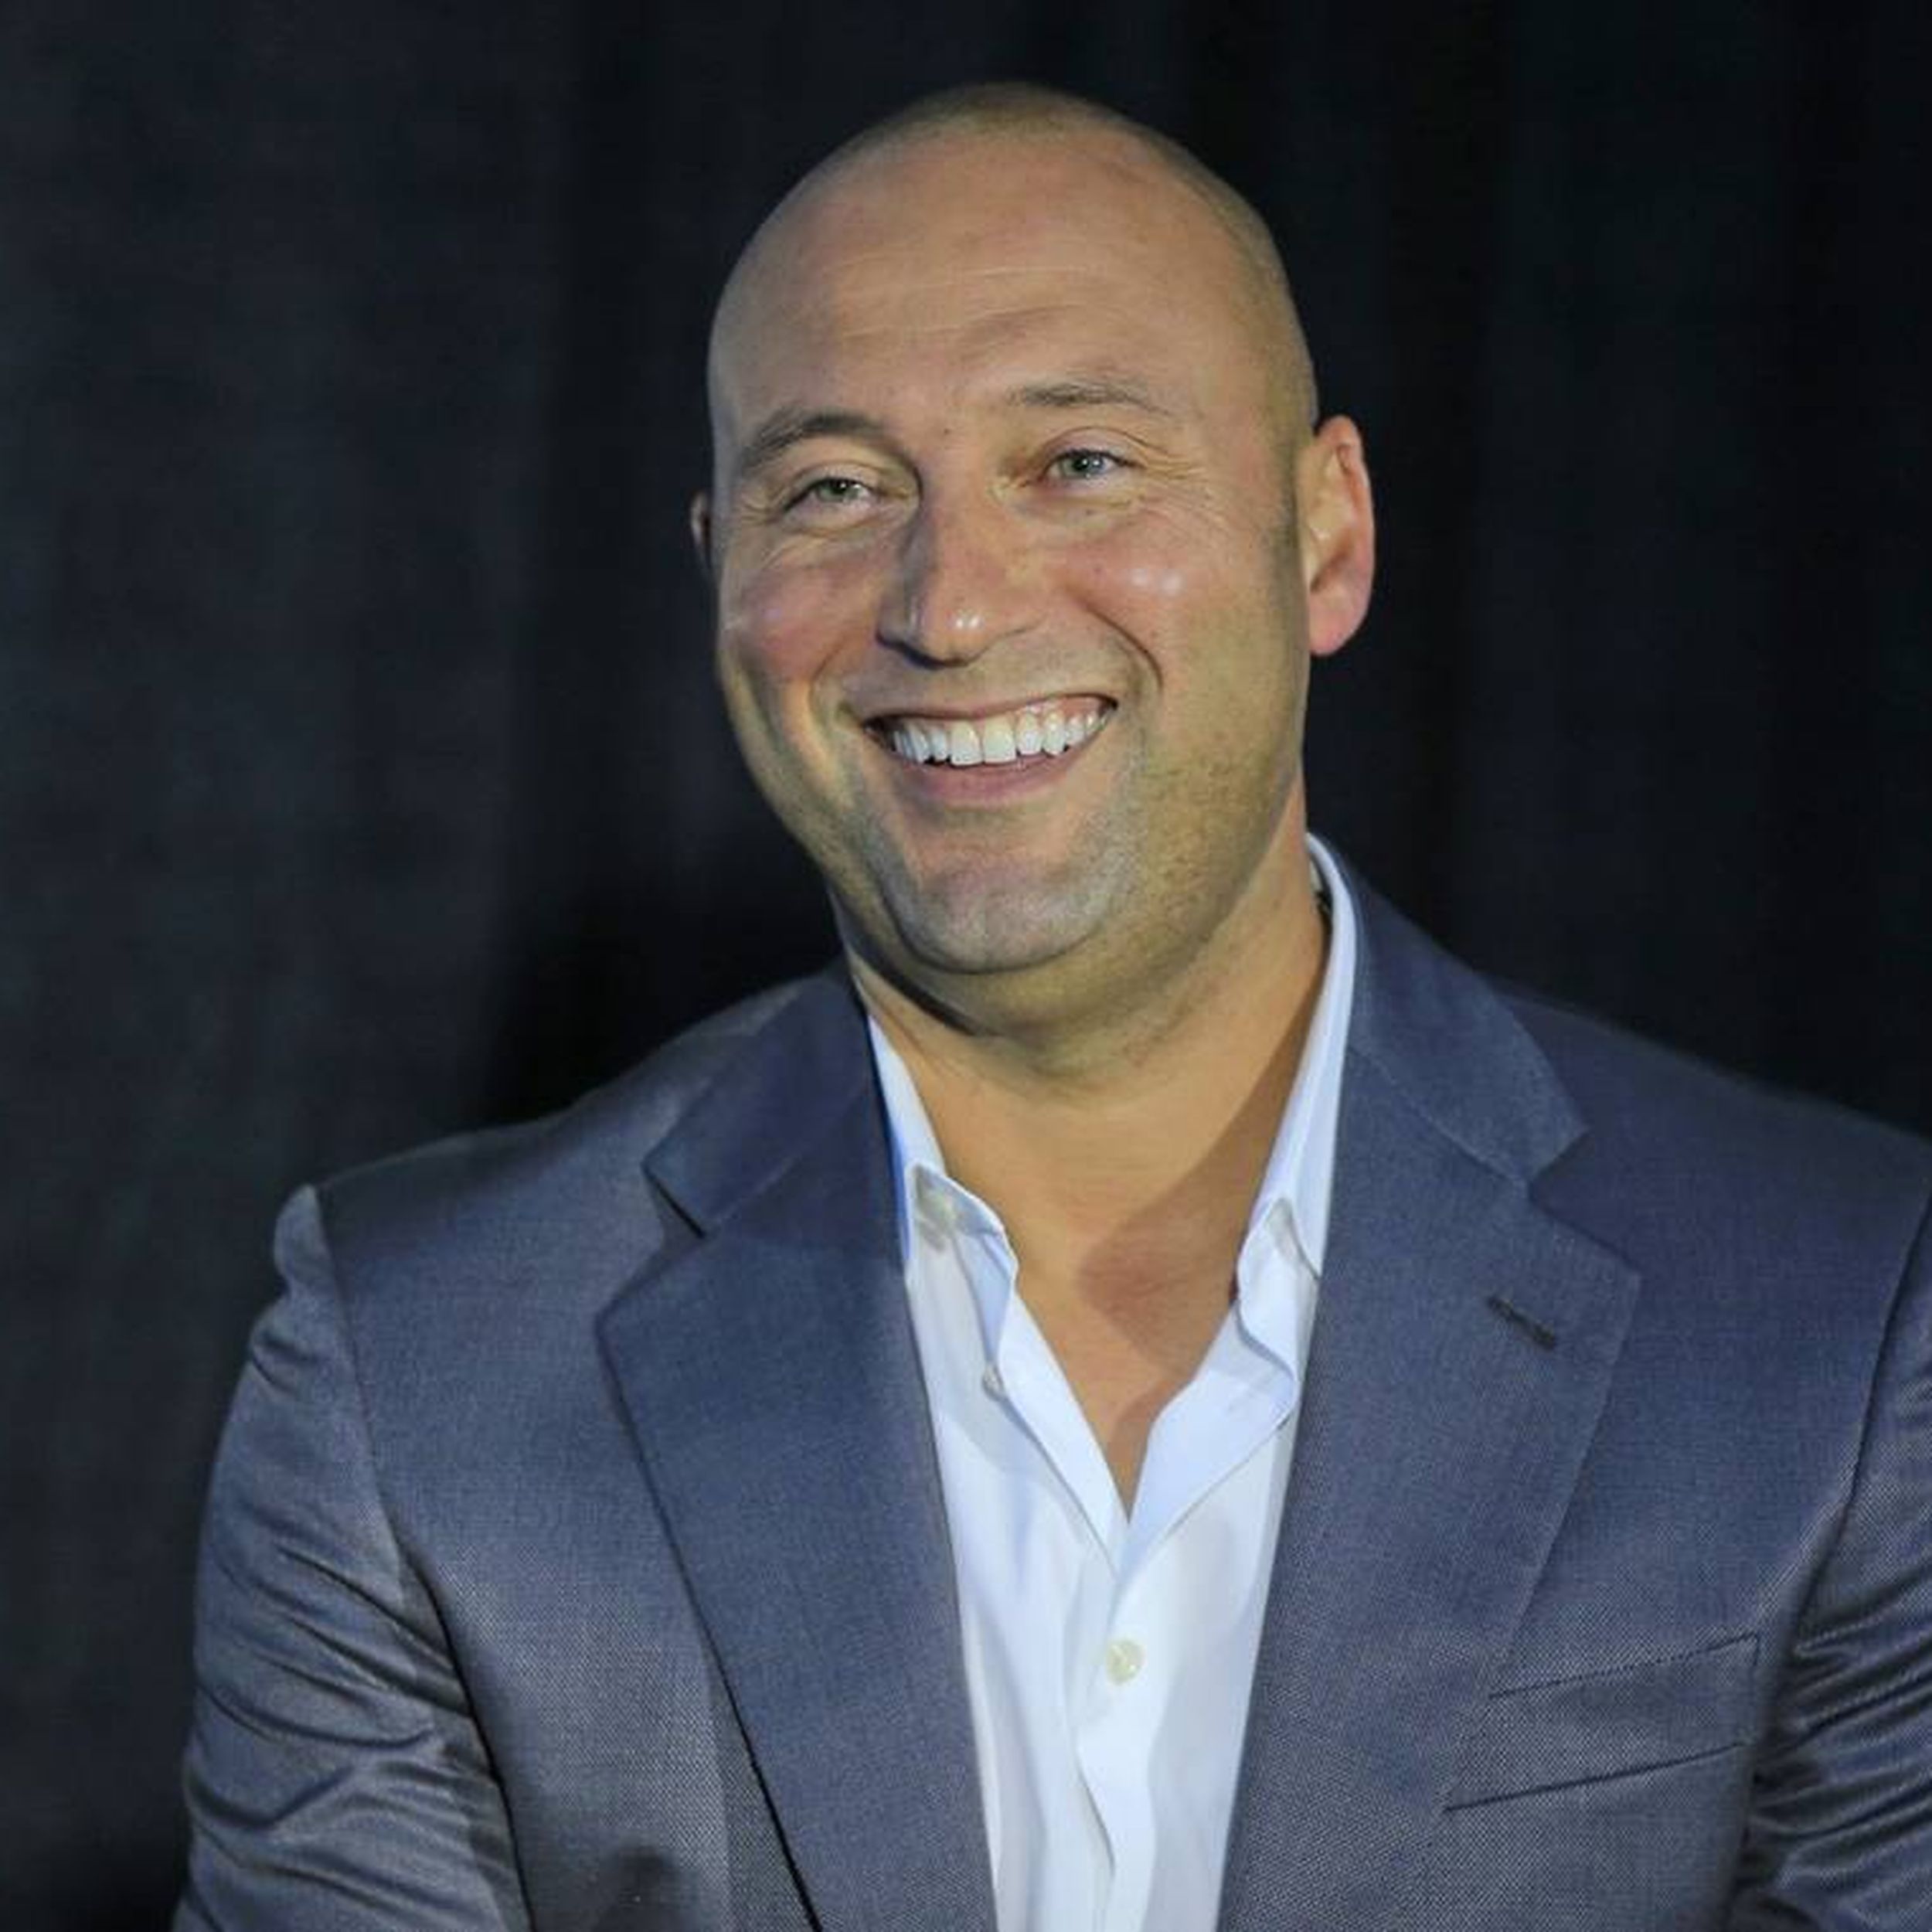 Spike Lee to Executive Produce Upcoming Derek Jeter Documentary